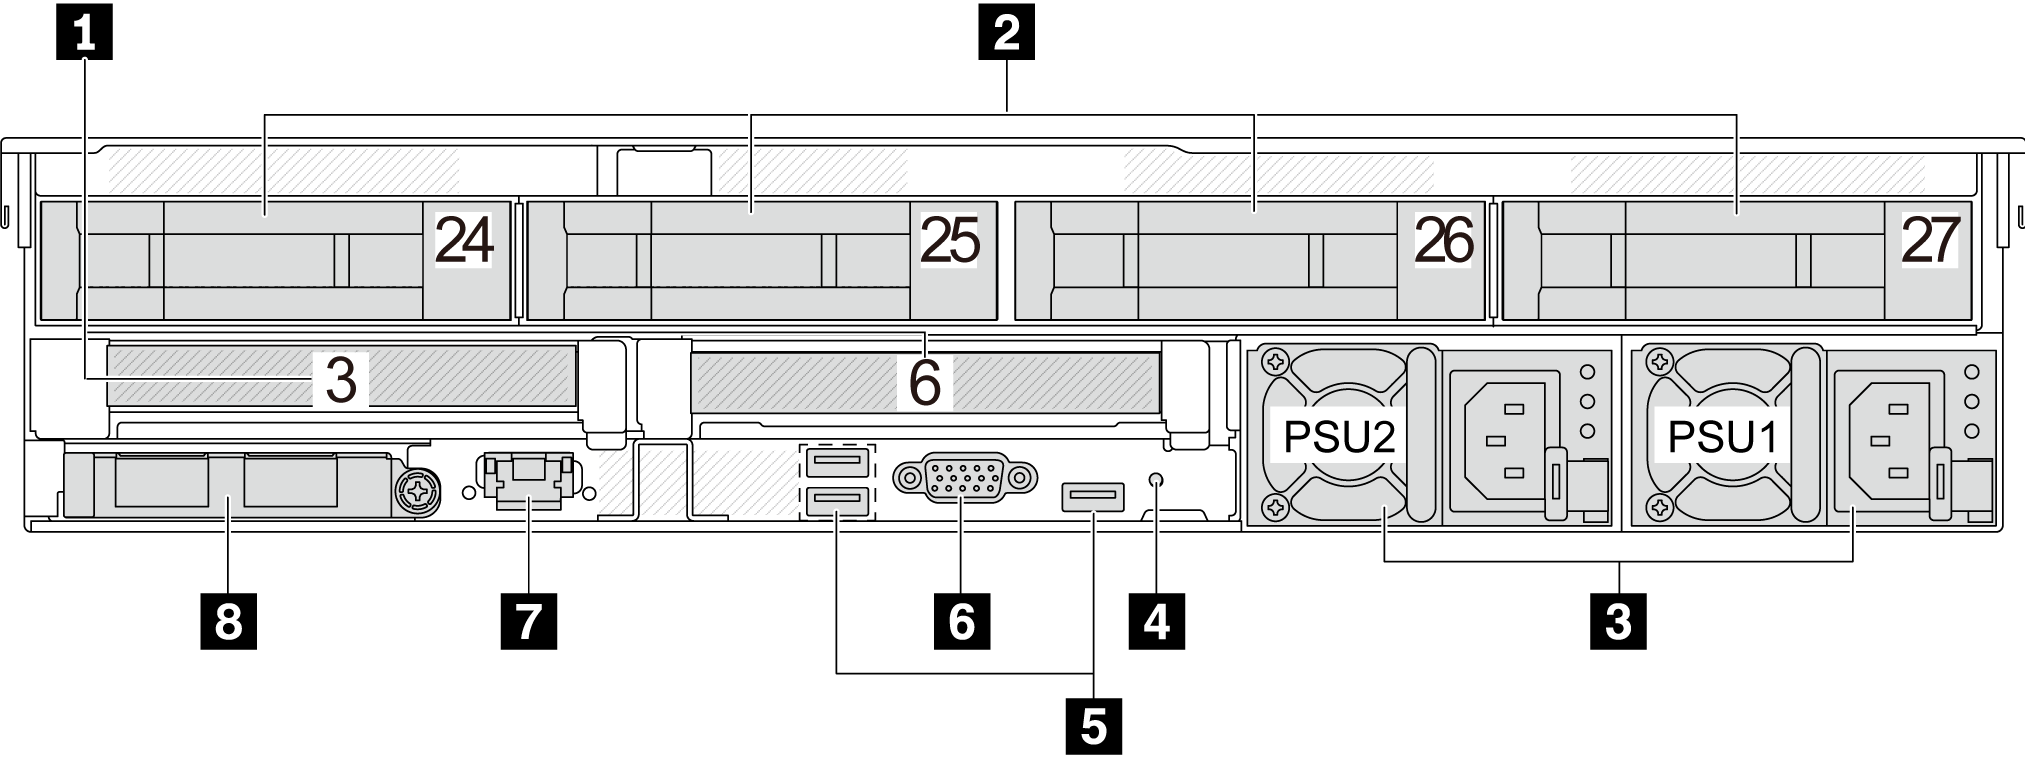 Rear view of server models with four rear 3.5-inch drive bays and two PCIe slots